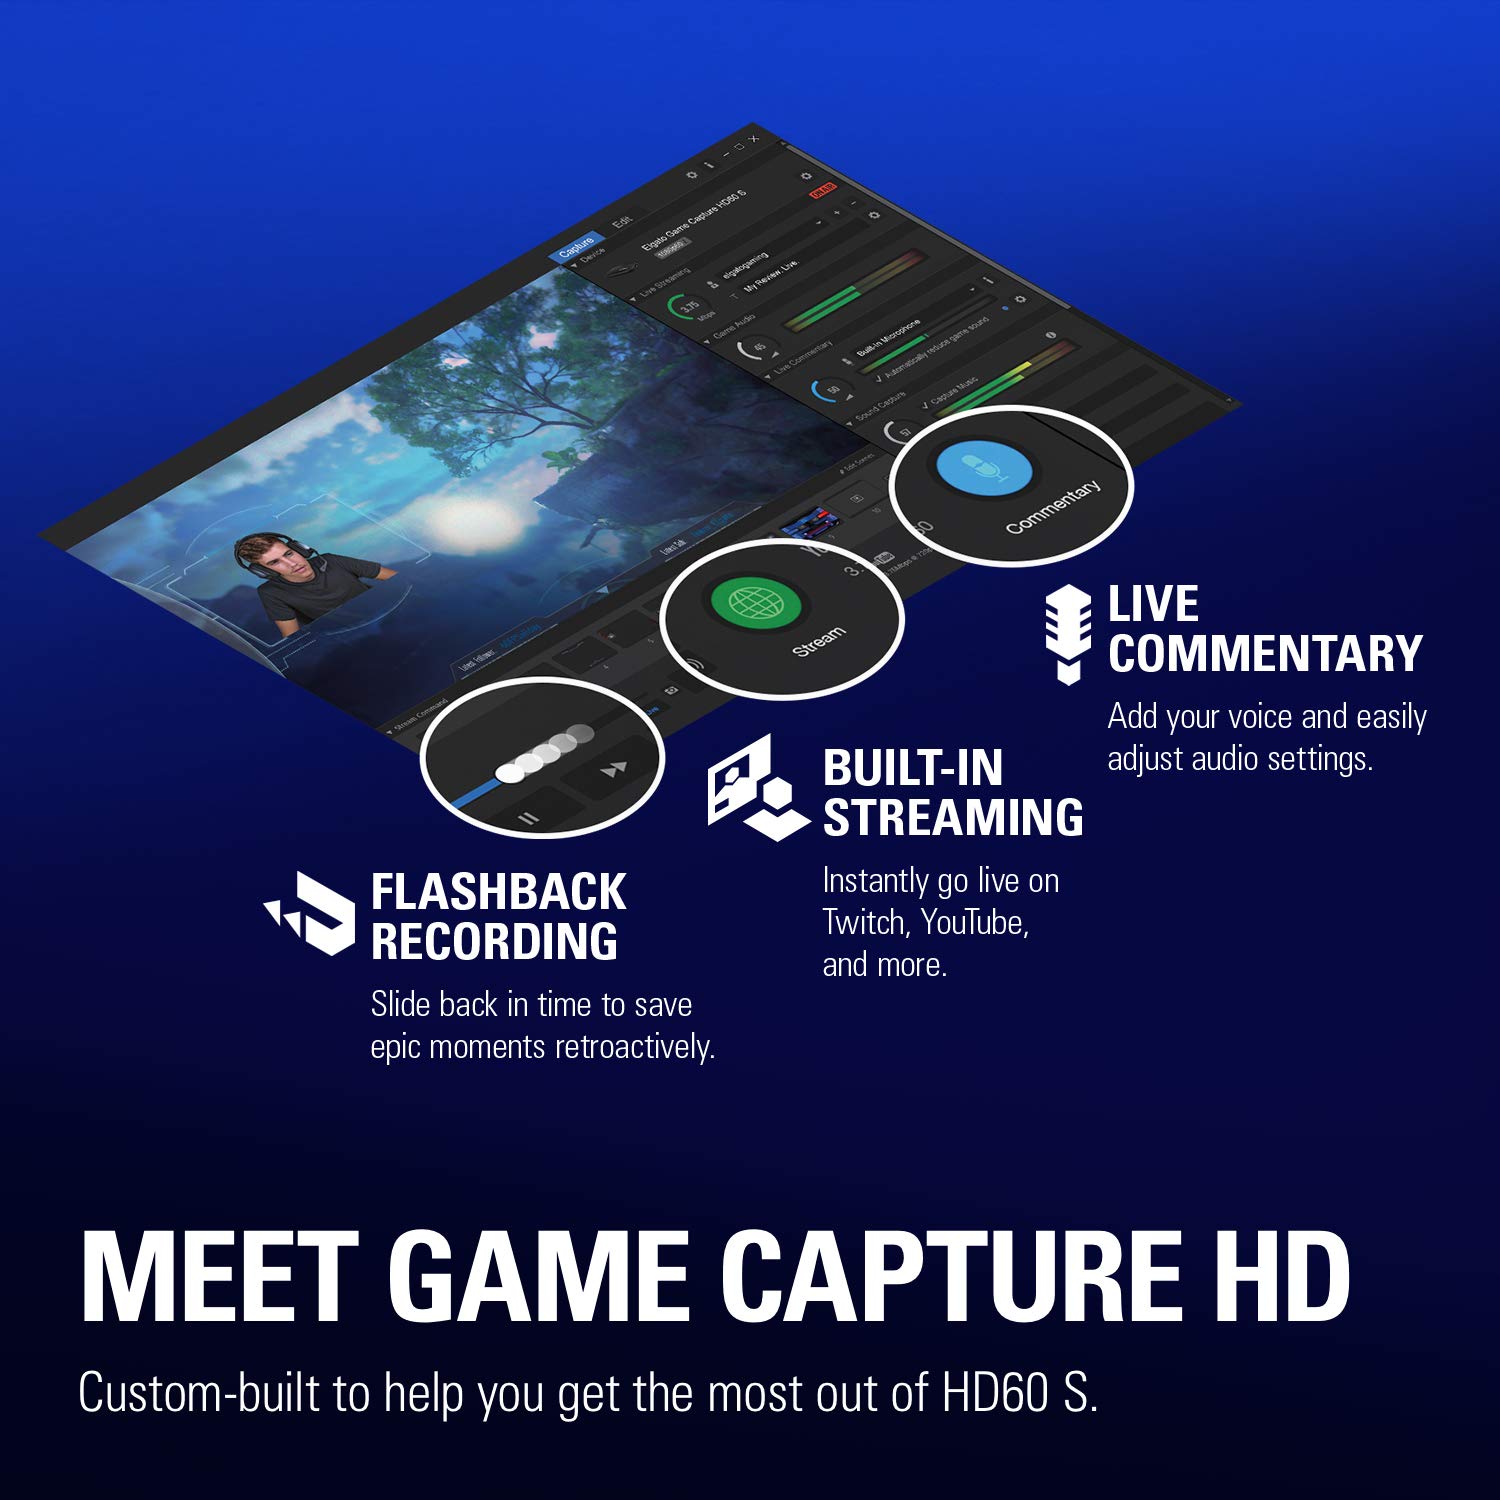 Elgato HD60 S, External Capture Card, Stream and Record in 1080p60 with ultra-low latency on PS5, PS4/Pro, Xbox Series X/S, Xbox One X/S, in OBS, Twitch, YouTube, works with PC/Mac